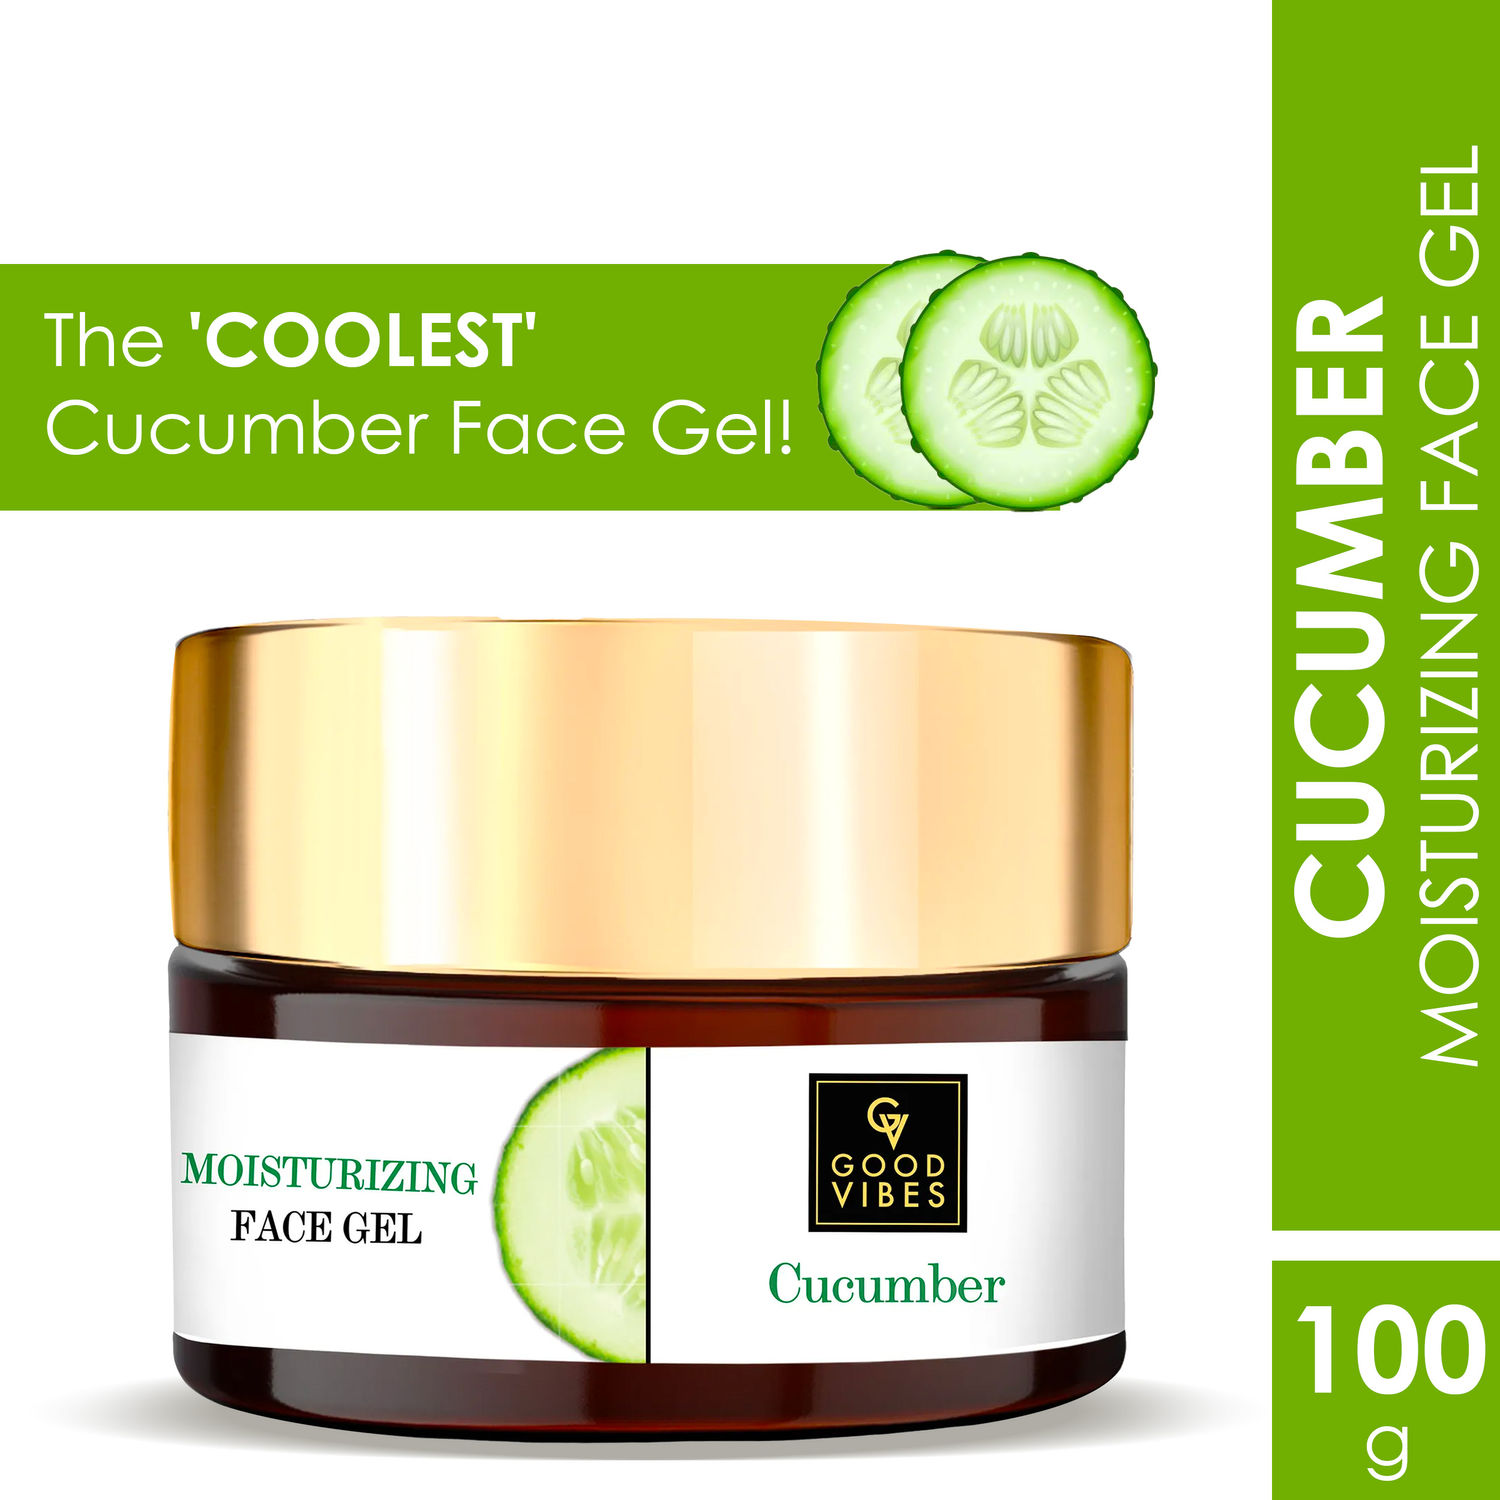 Buy Good Vibes Cucumber Moisturizing Face Gel | Cleansing, Calming, Soothing | No Parabens, No Sulphates, No Mineral Oil, No Animal Testing (100 g) - Purplle